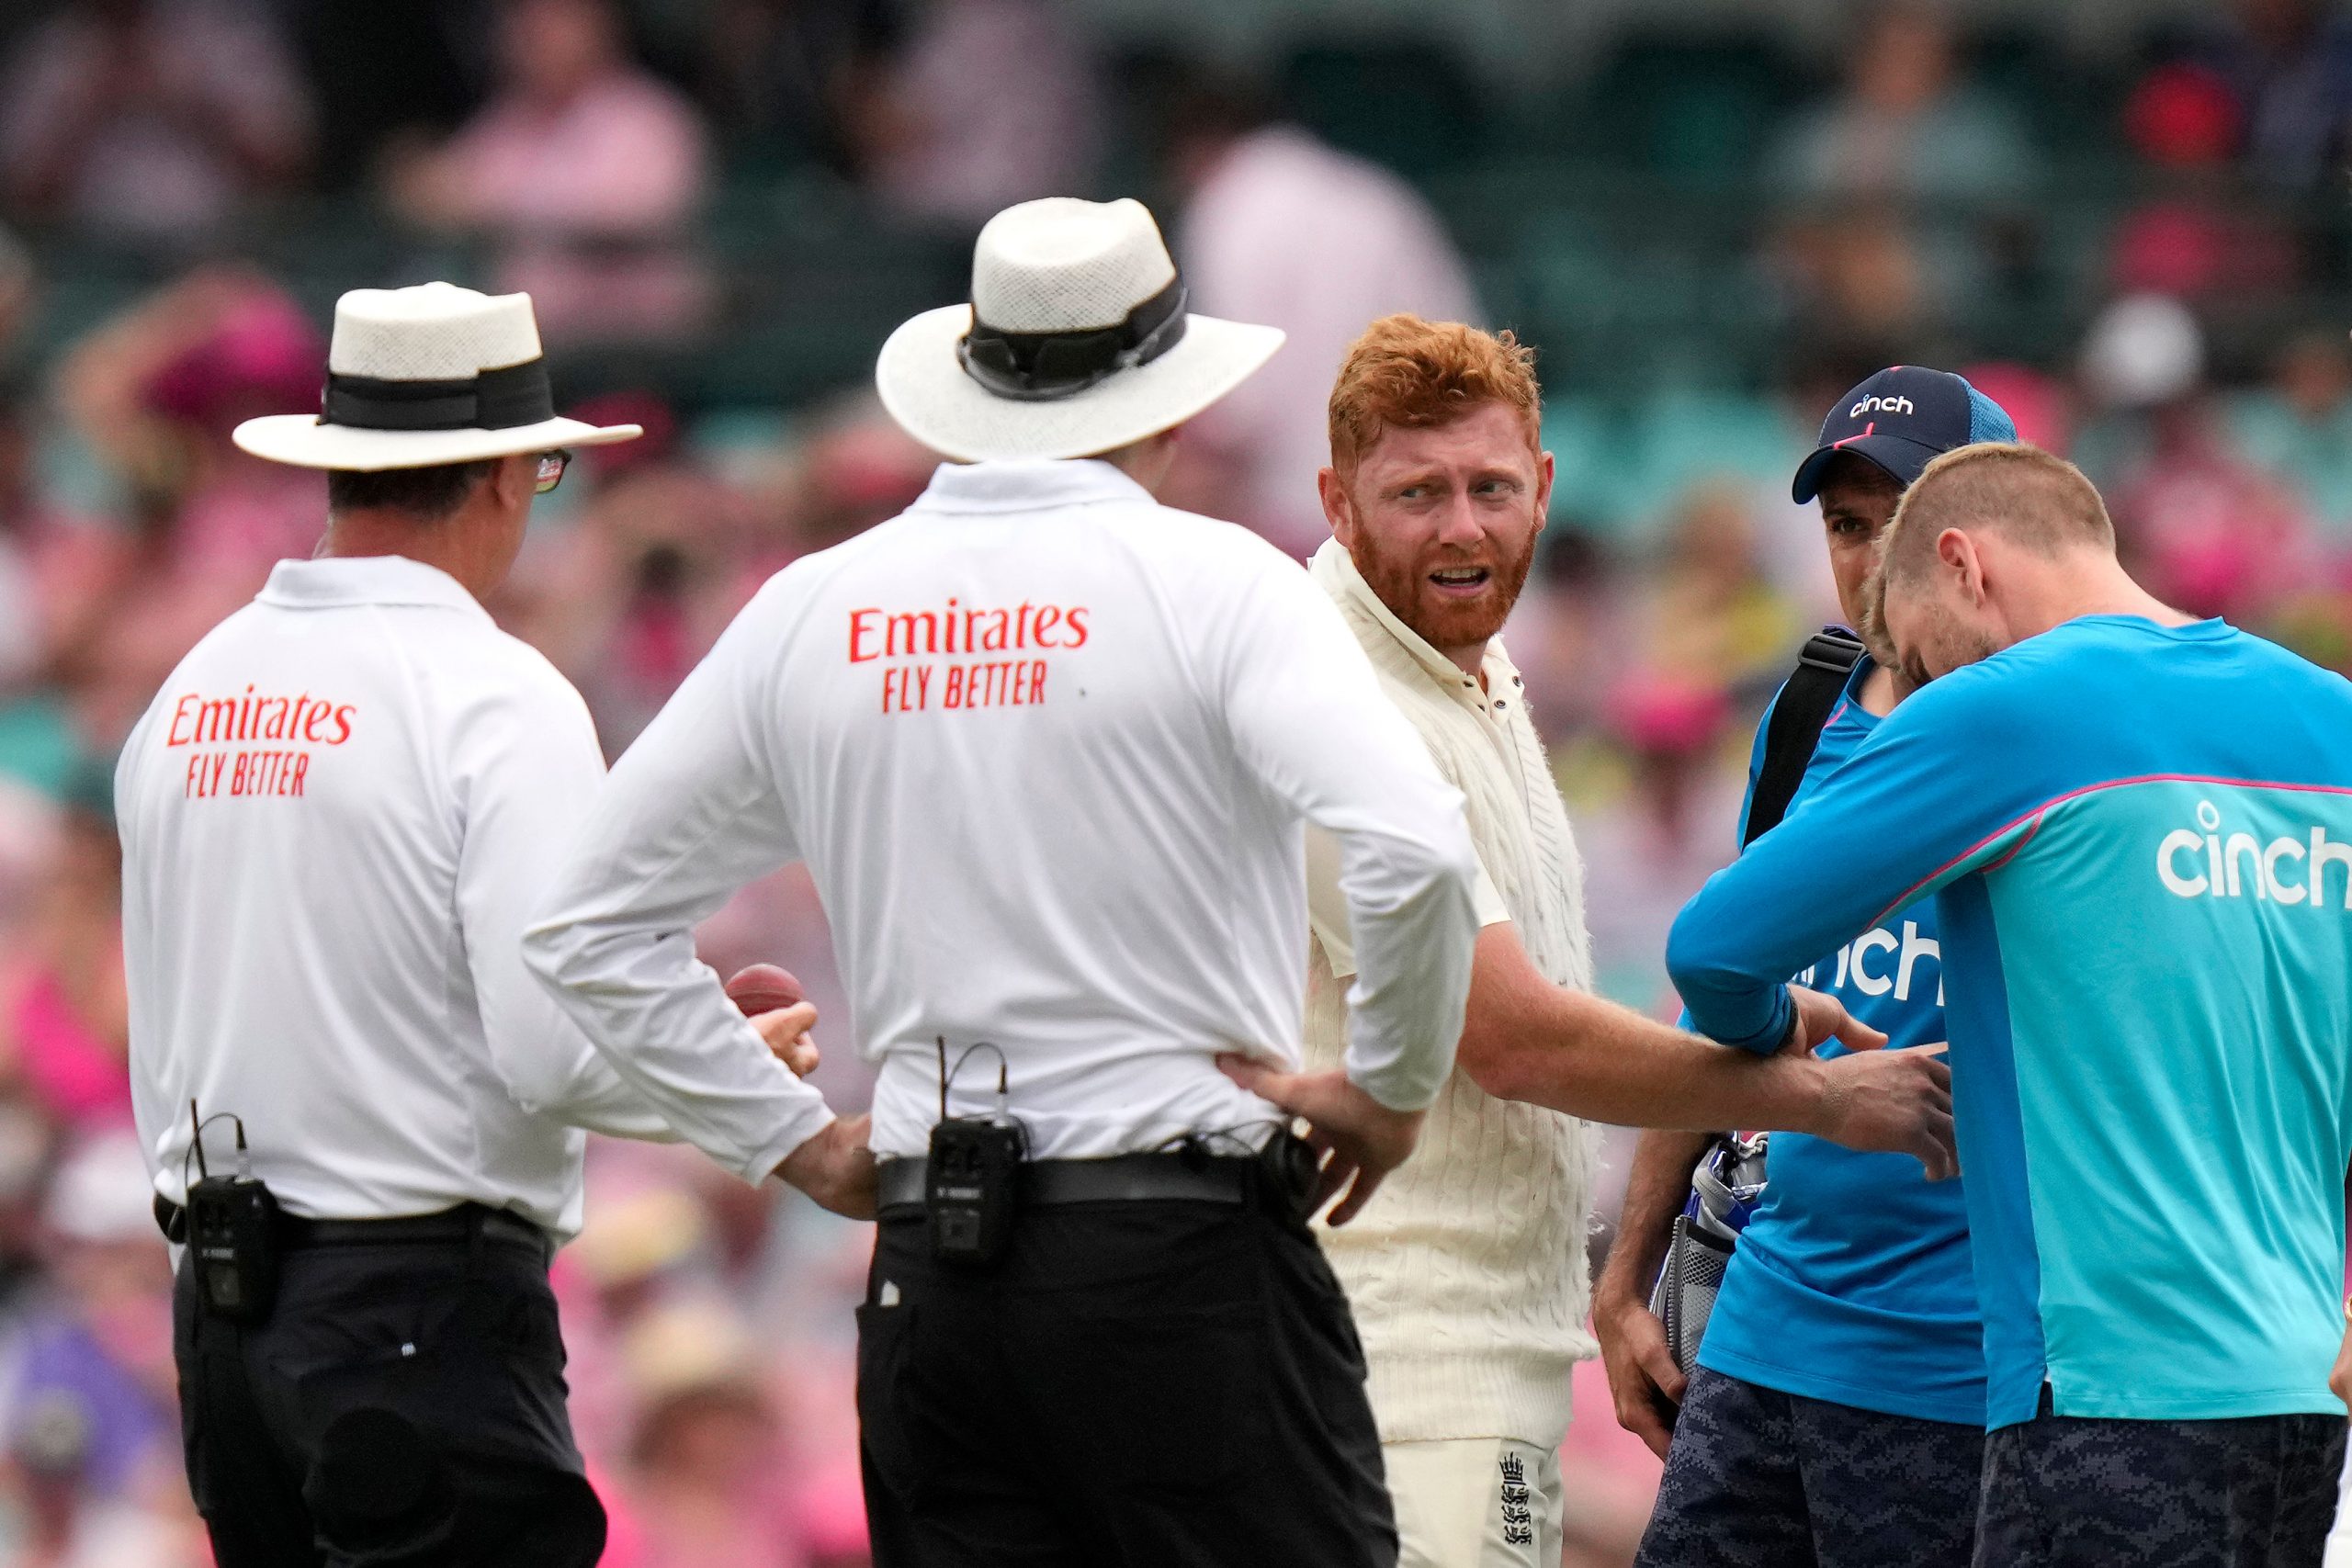 Sometimes people overstep the mark: Bairstow on 3 abusive fans being removed